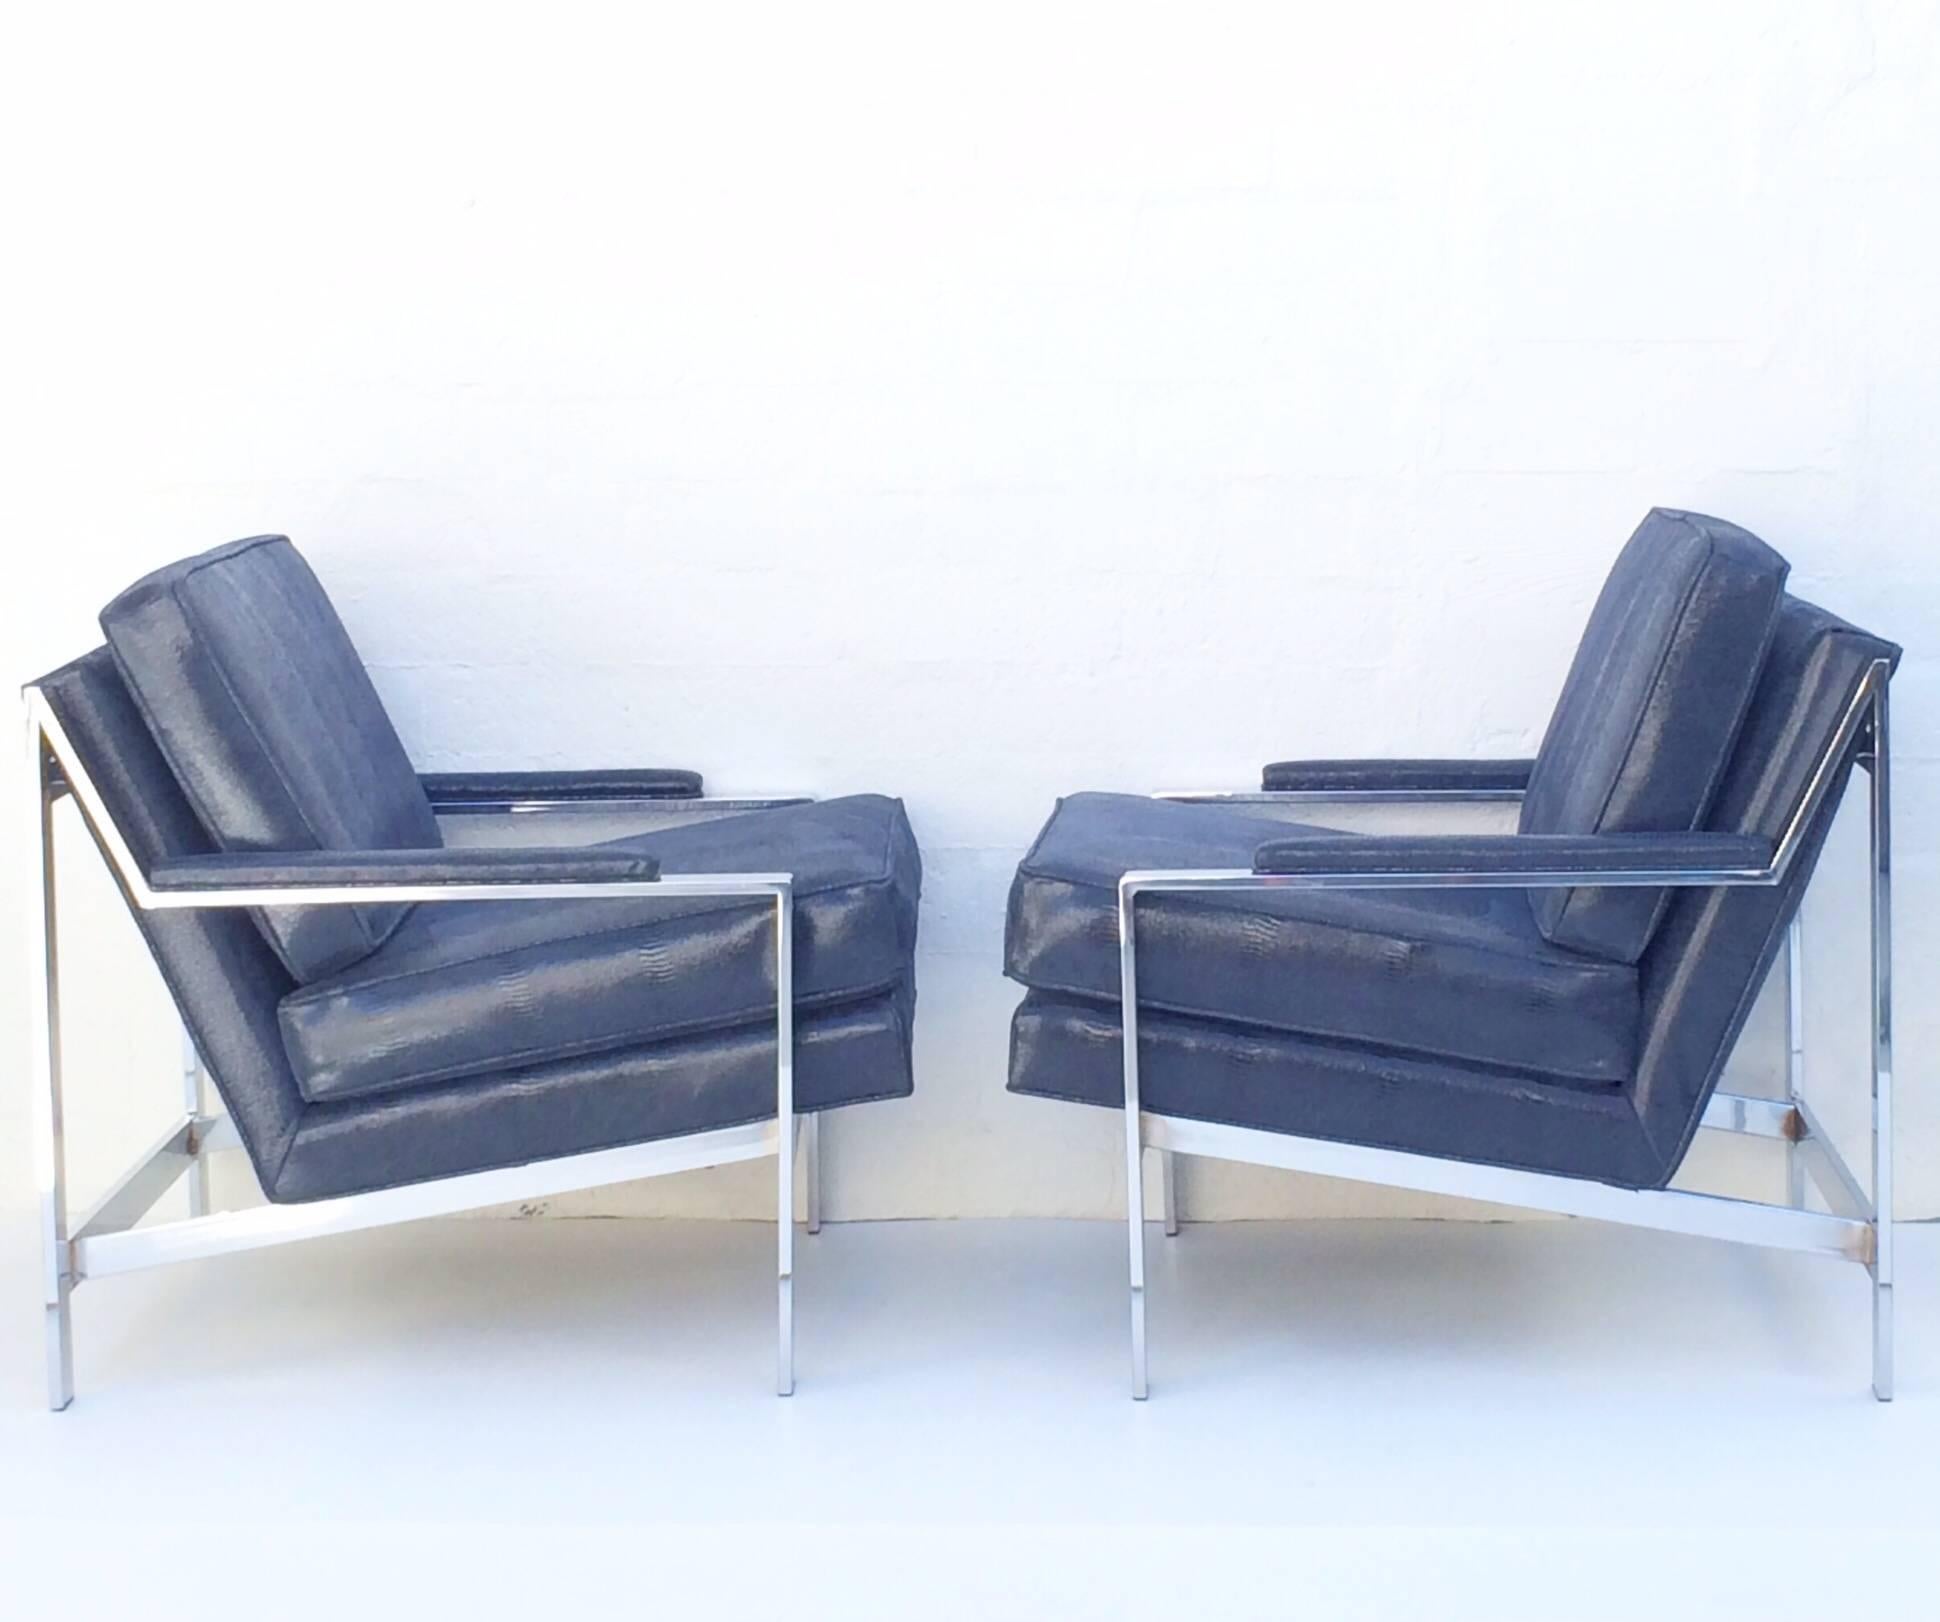 Stunning pair of polished chrome and leather lounge chairs designed by Cy Mann. 
Newly reupholster in a sexy midnight blue faux snakeskin leather.